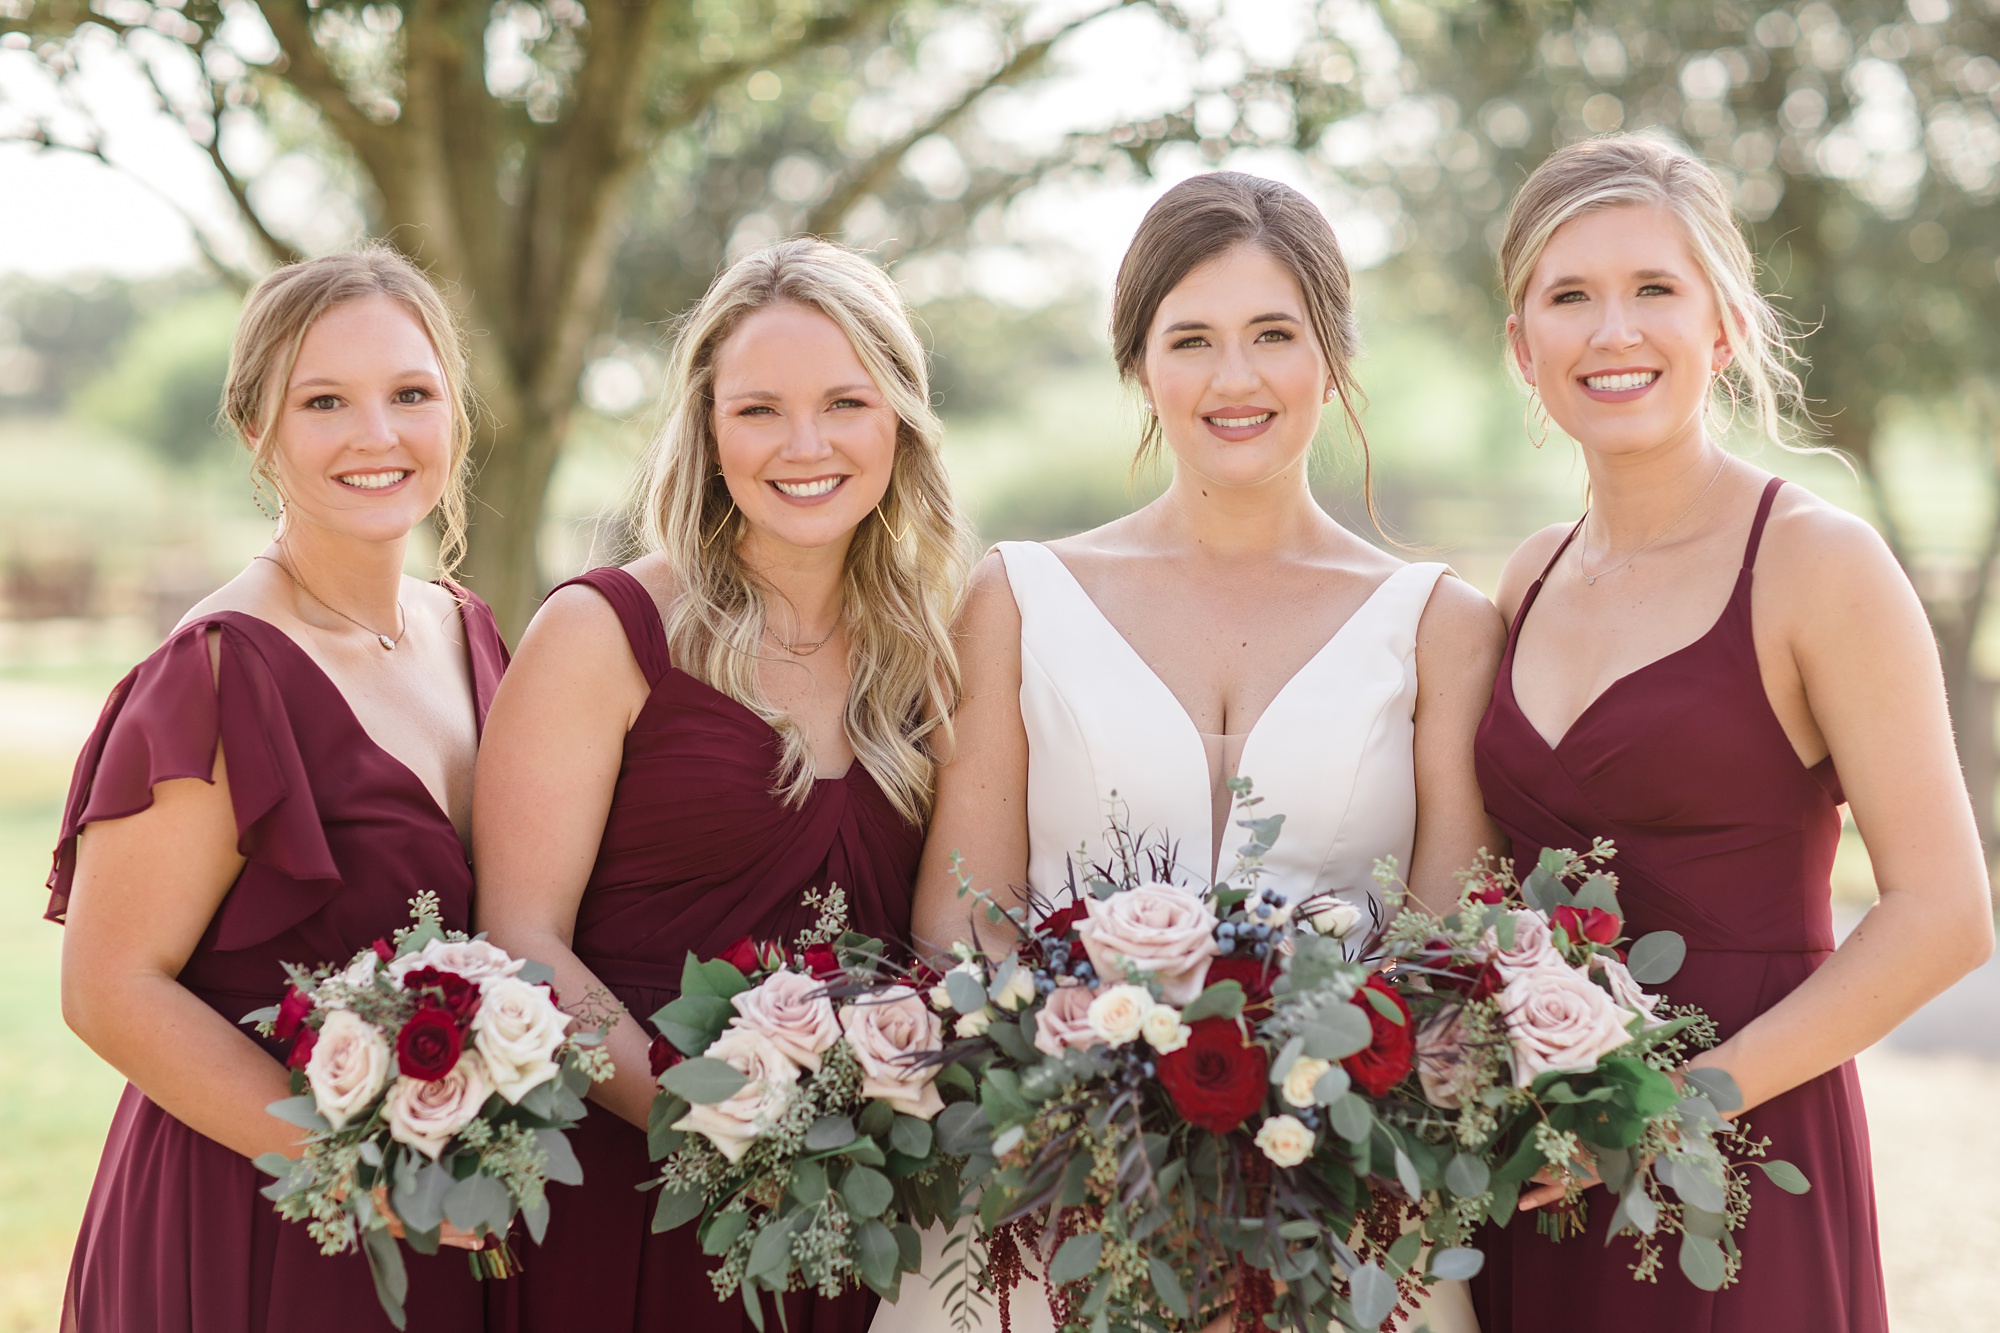 bride poses with bridesmaids in cranberry gowns